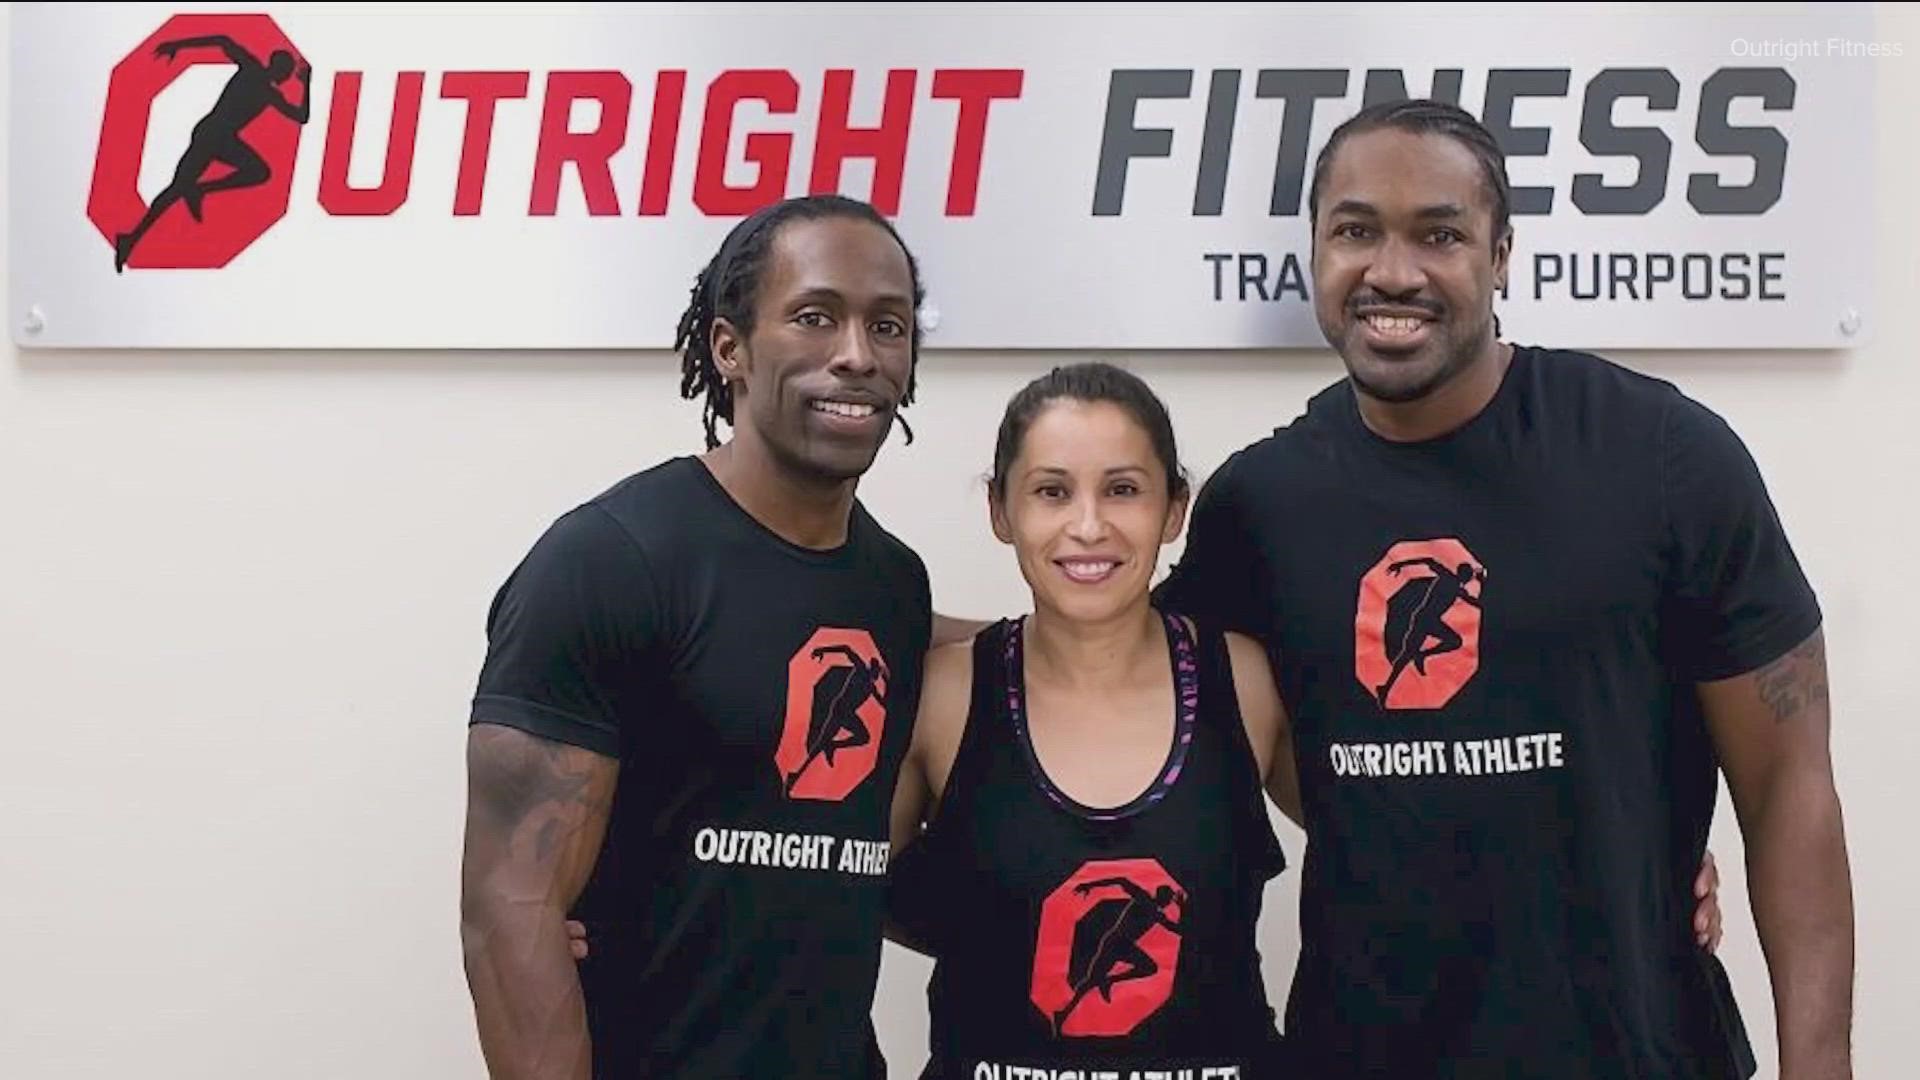 One local gym owner hopes his business inspires others to never settle for less. KVUE's Dominique Newland gives us an inside look at Outright Fitness.